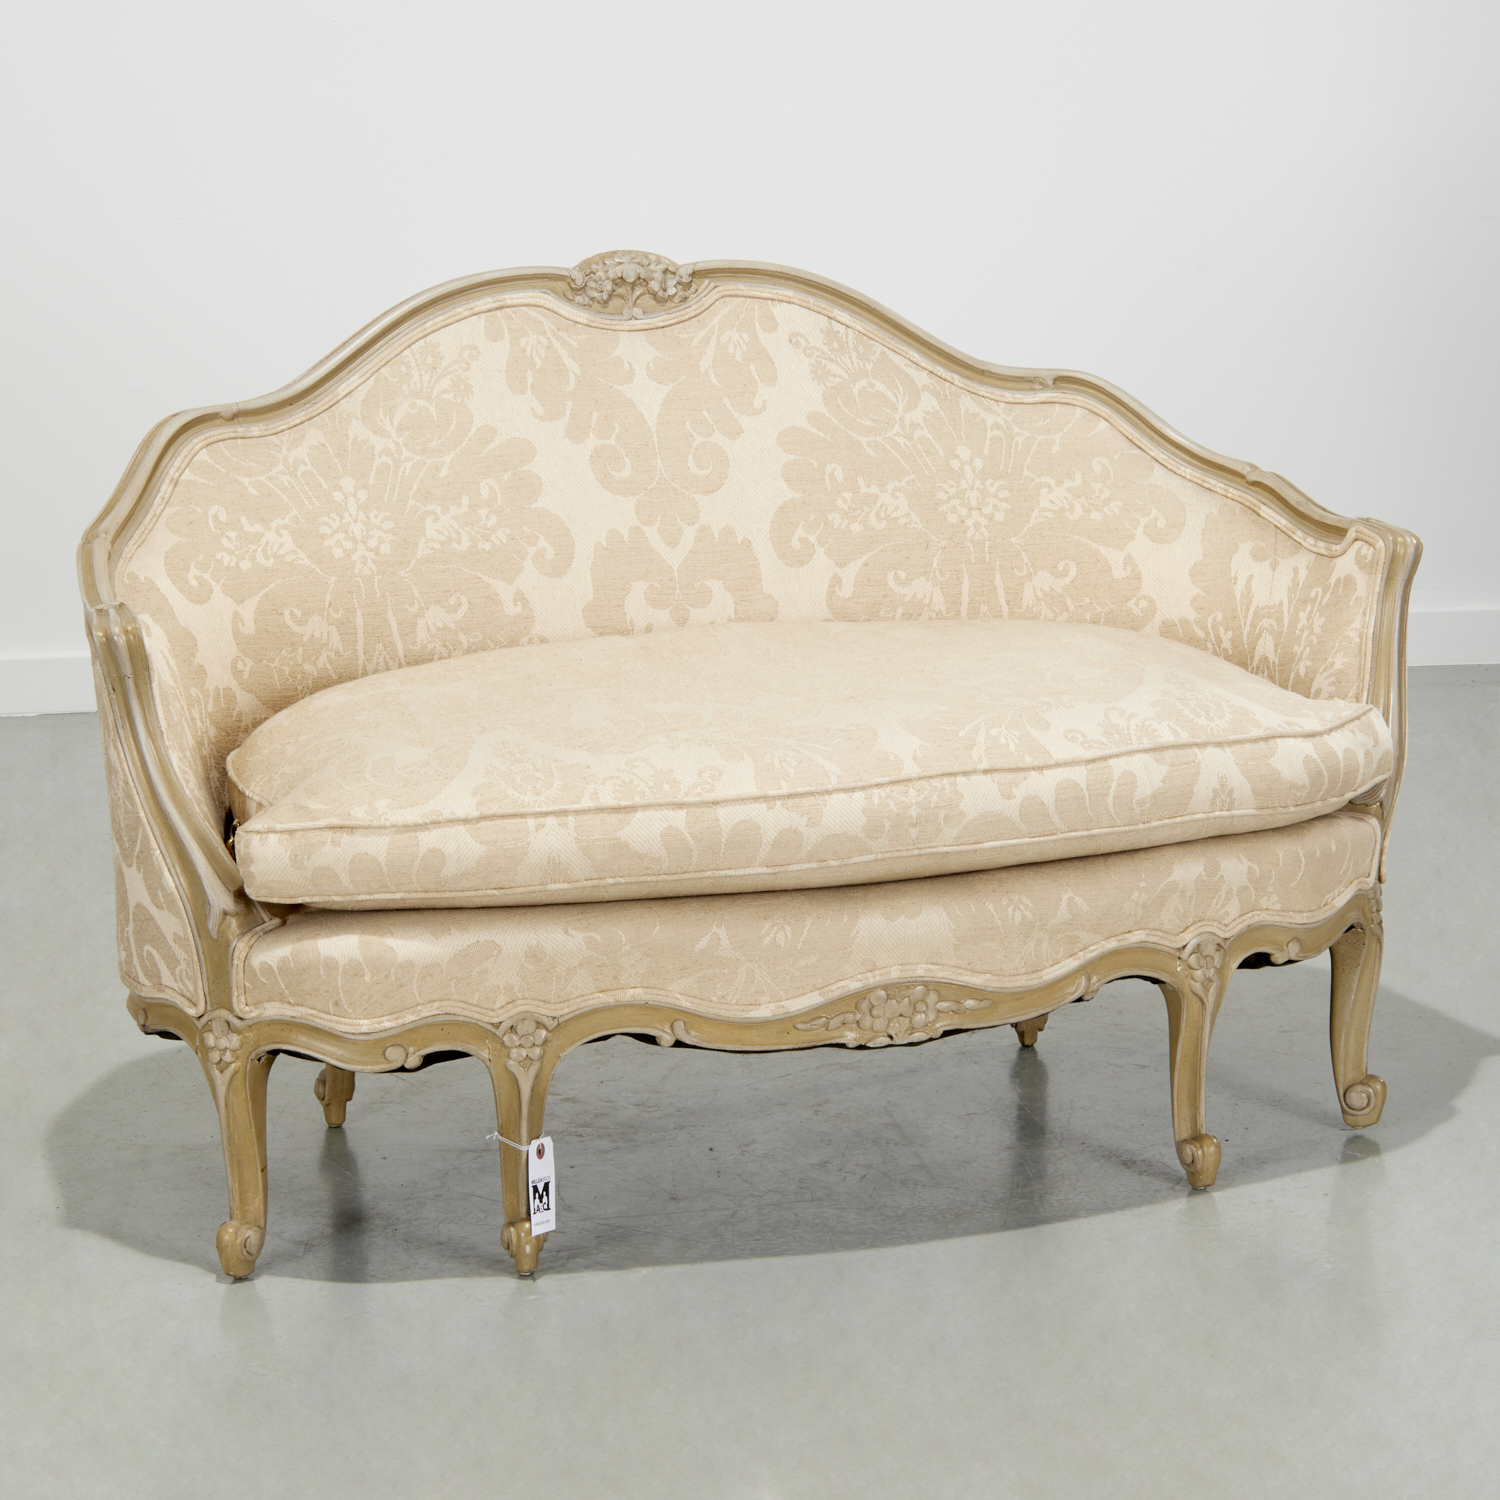 SMALL LOUIS XV STYLE UPHOLSTERED 2fb373